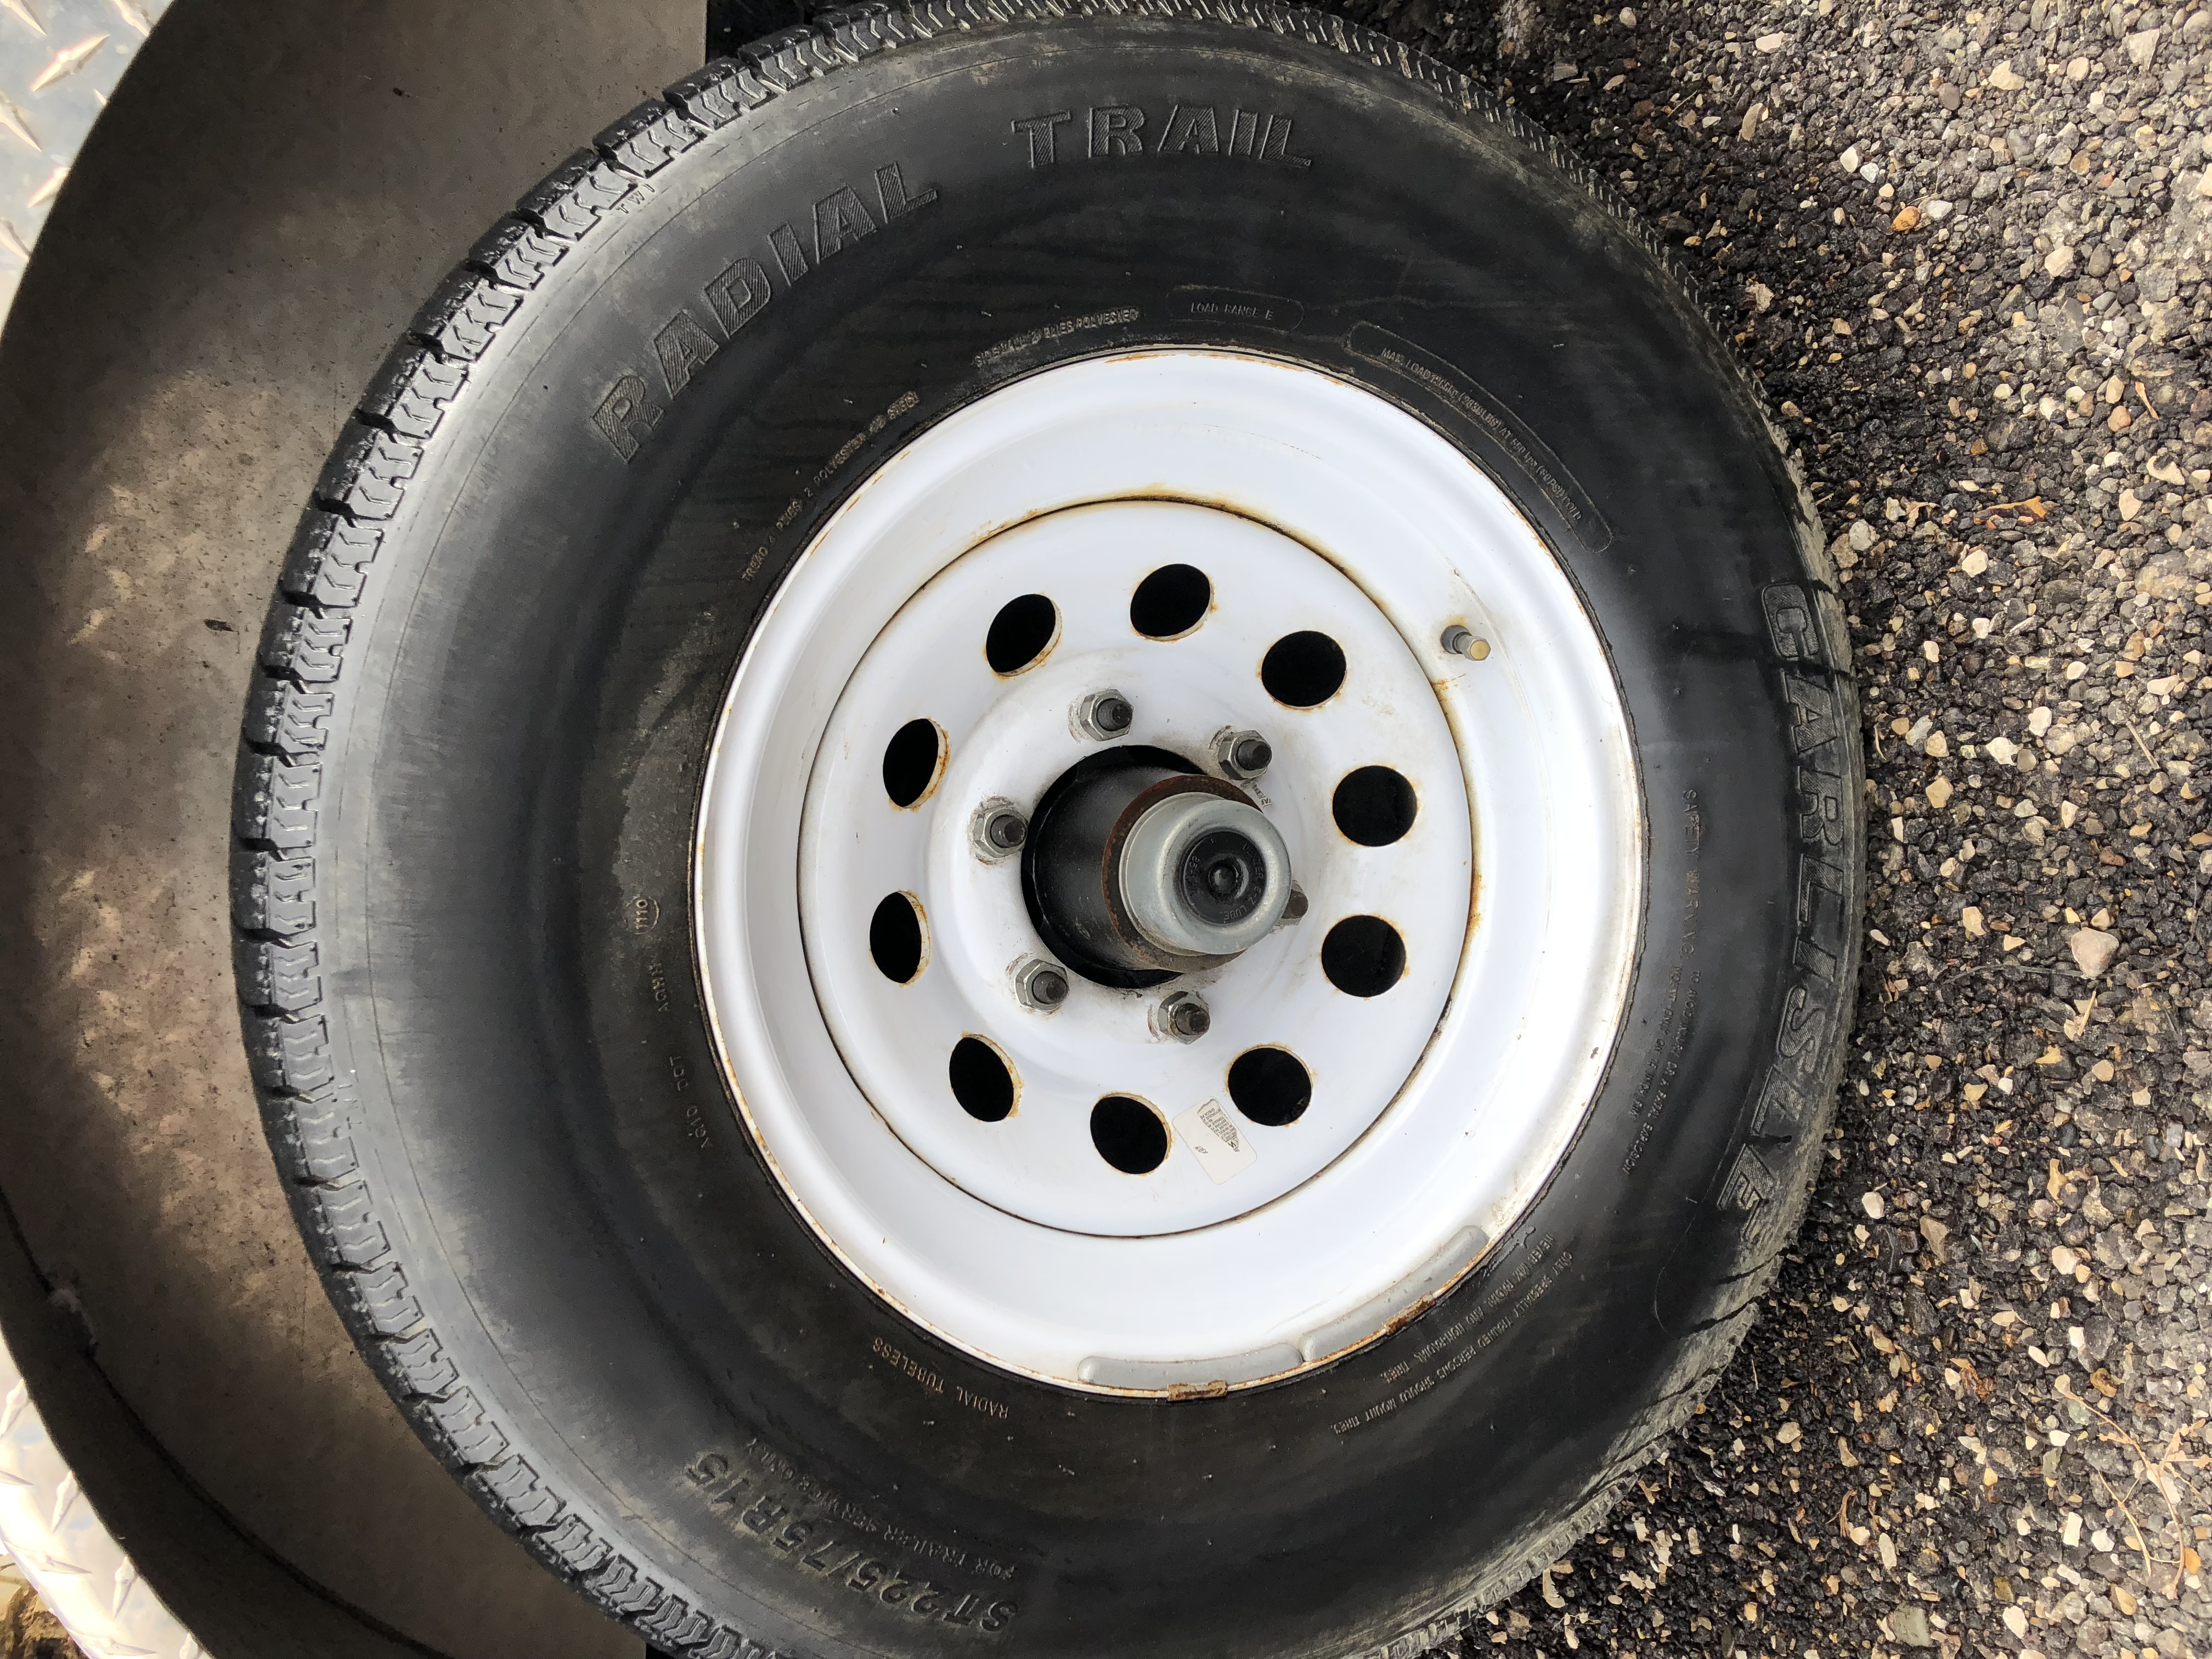 Trailer/camper wheels and tires